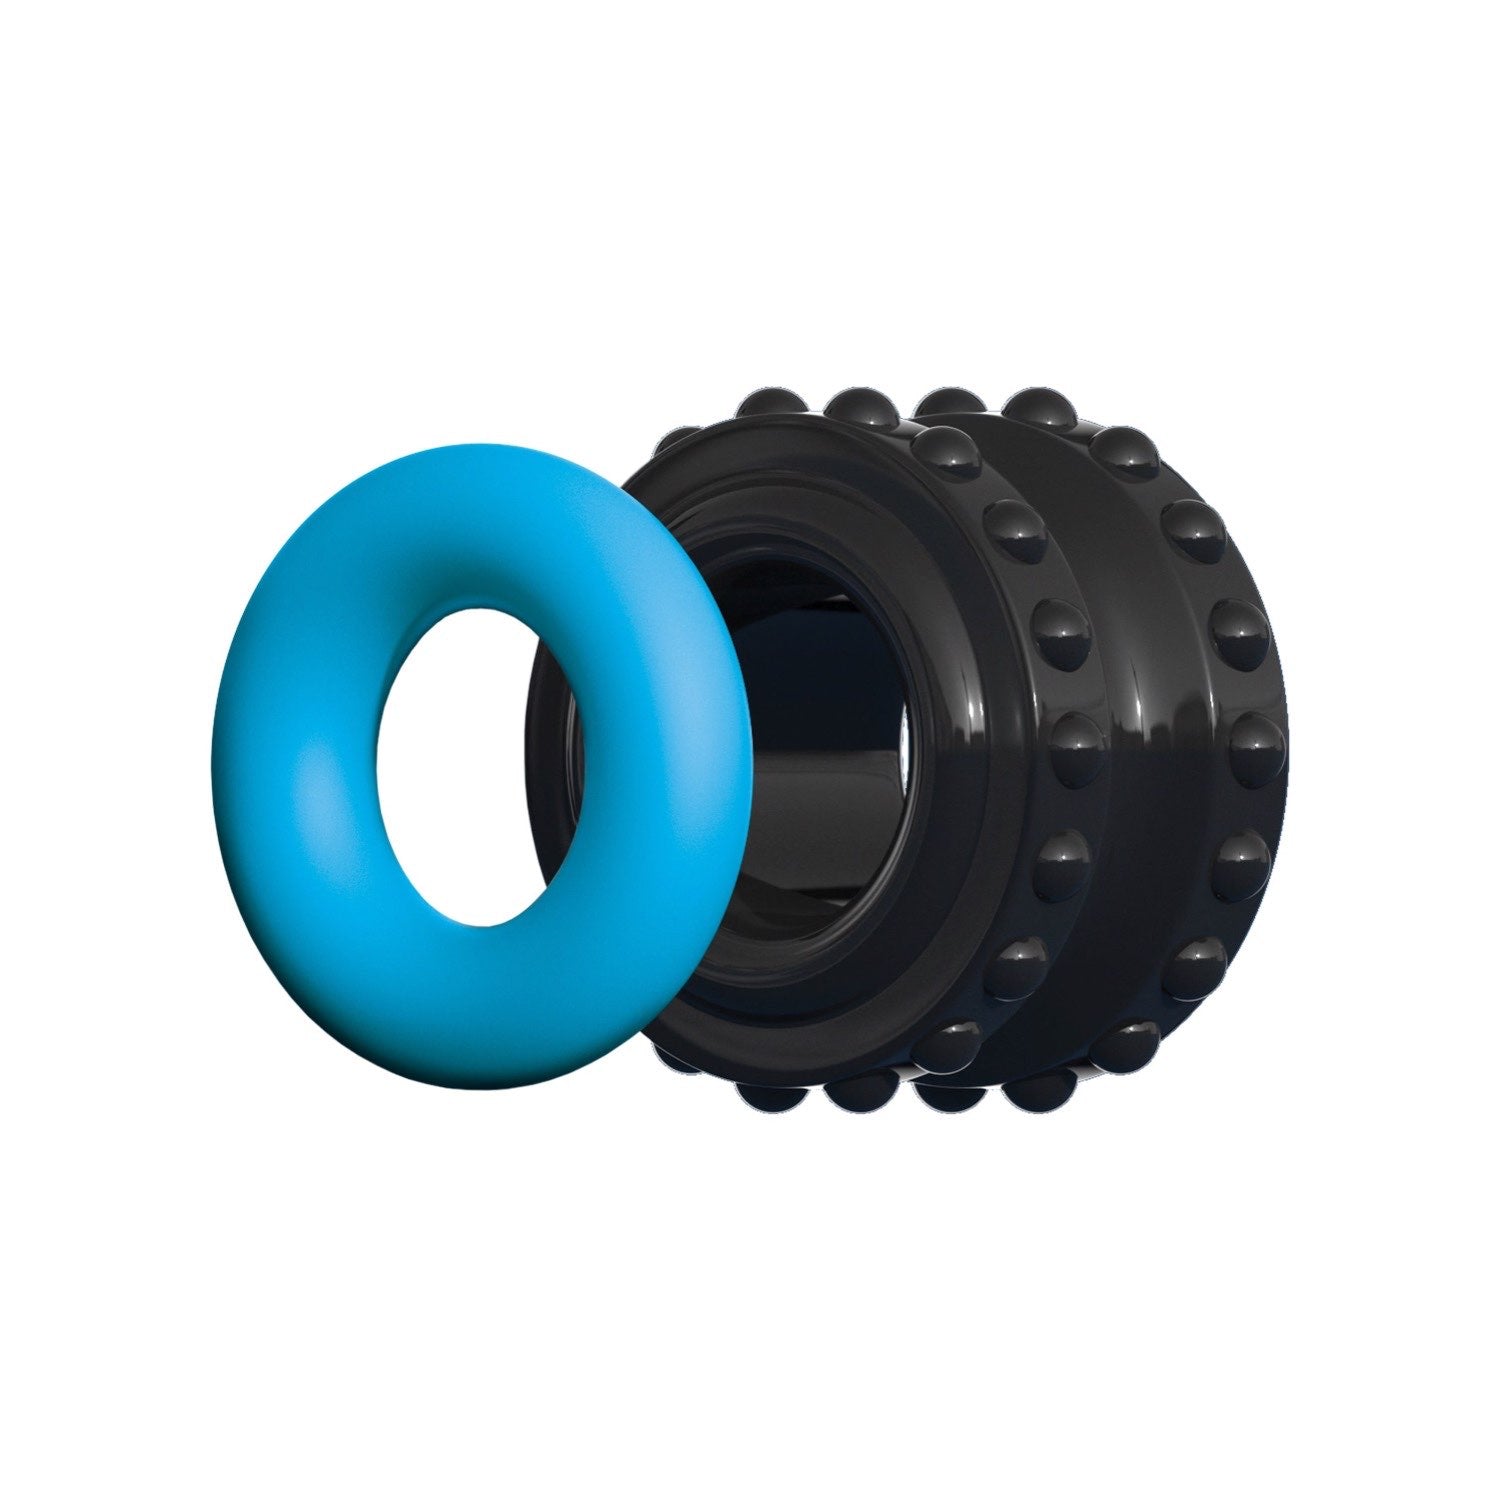 Sir Richards Pro Performance Beginners C-Ring - Black/Blue Cock Ring by Pipedream